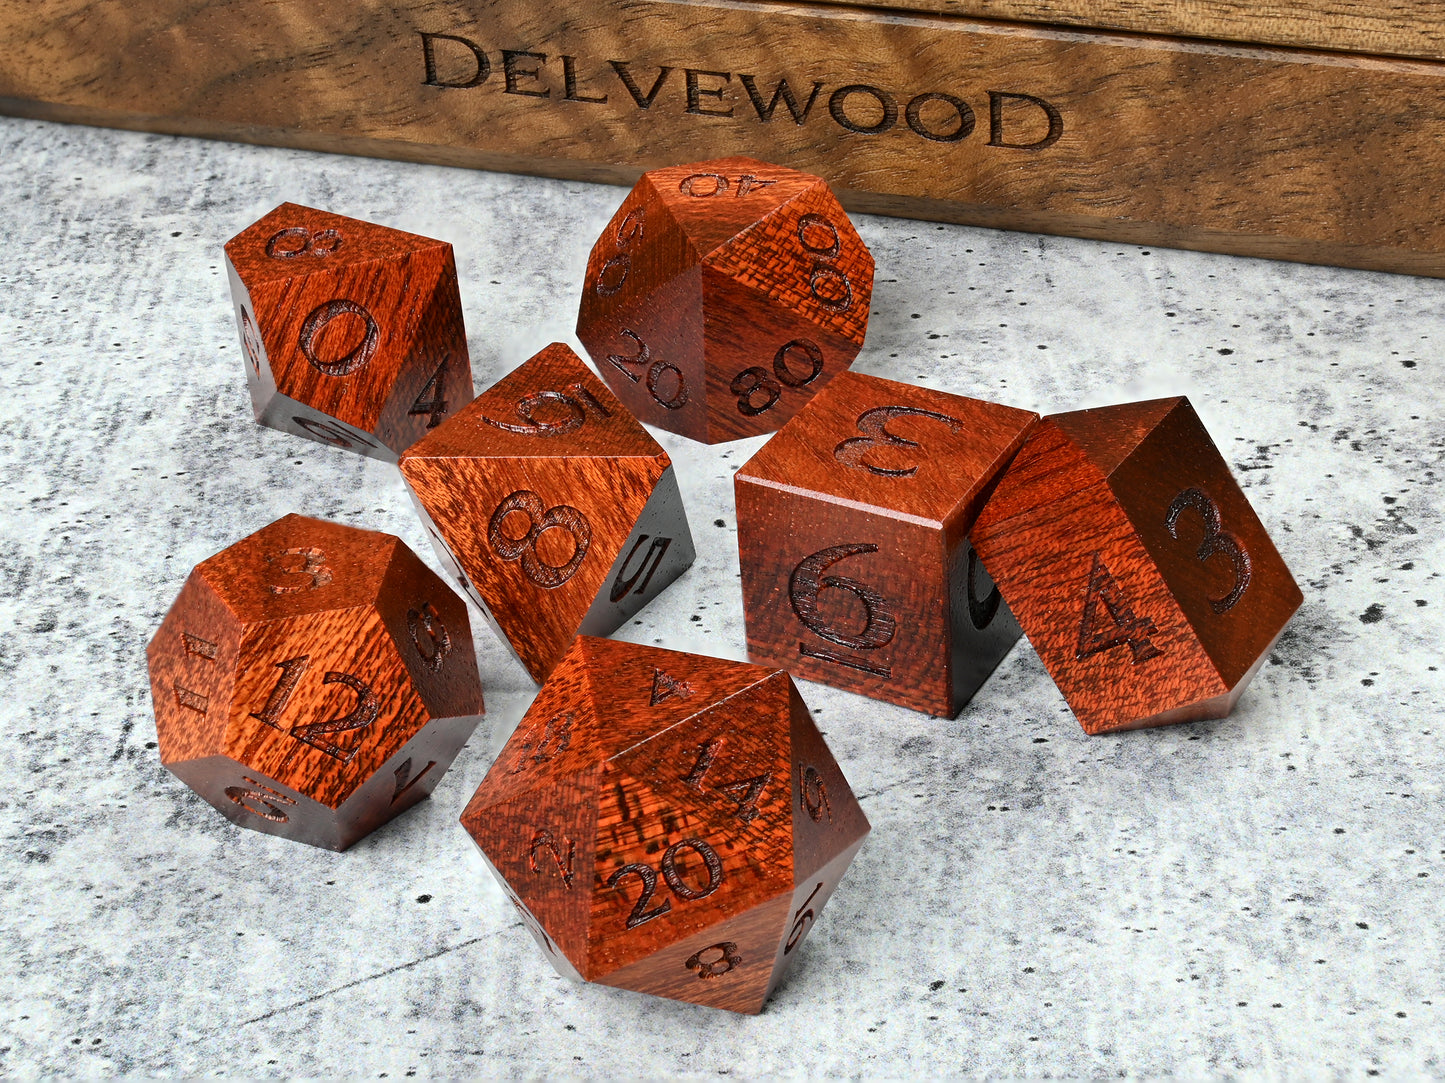 Bloodwood dice set for dnd rpg tabletop gaming in front of Delvewood delver's kit dice box.